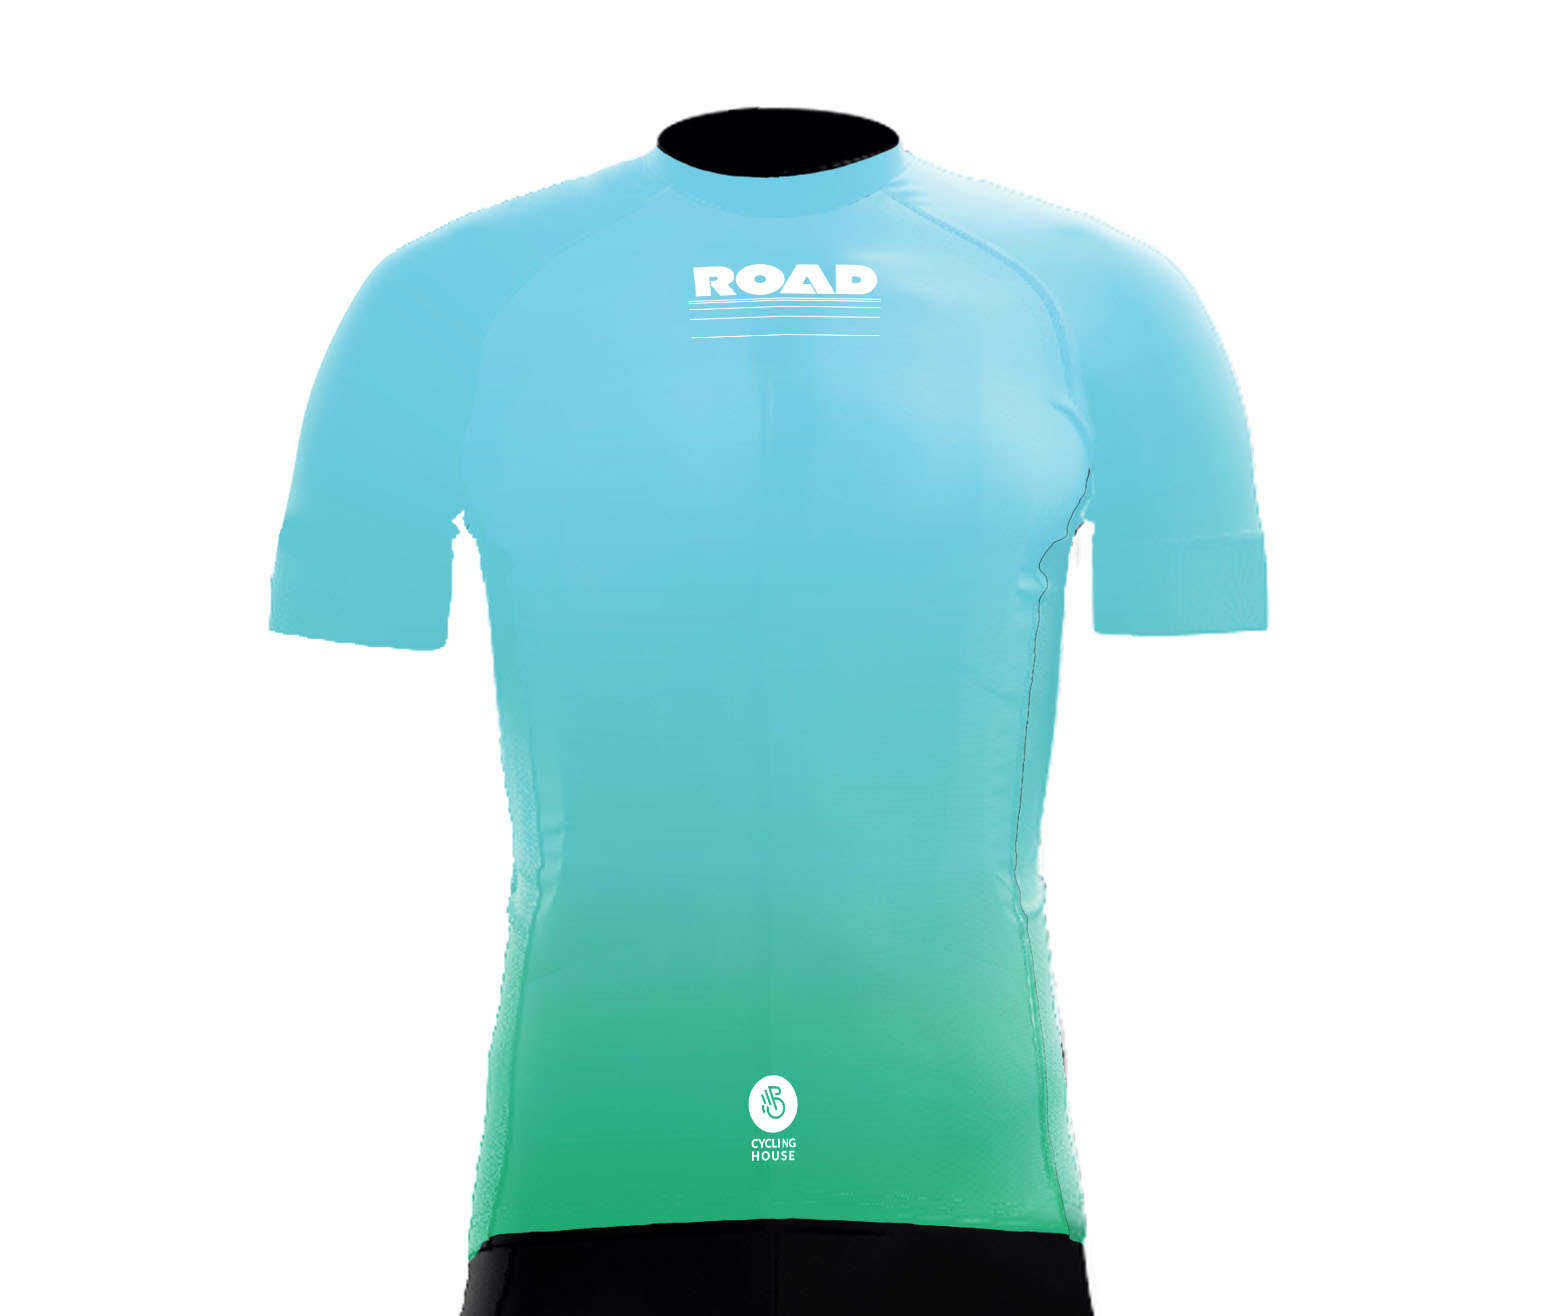 Cycling jersey ROAD image 2